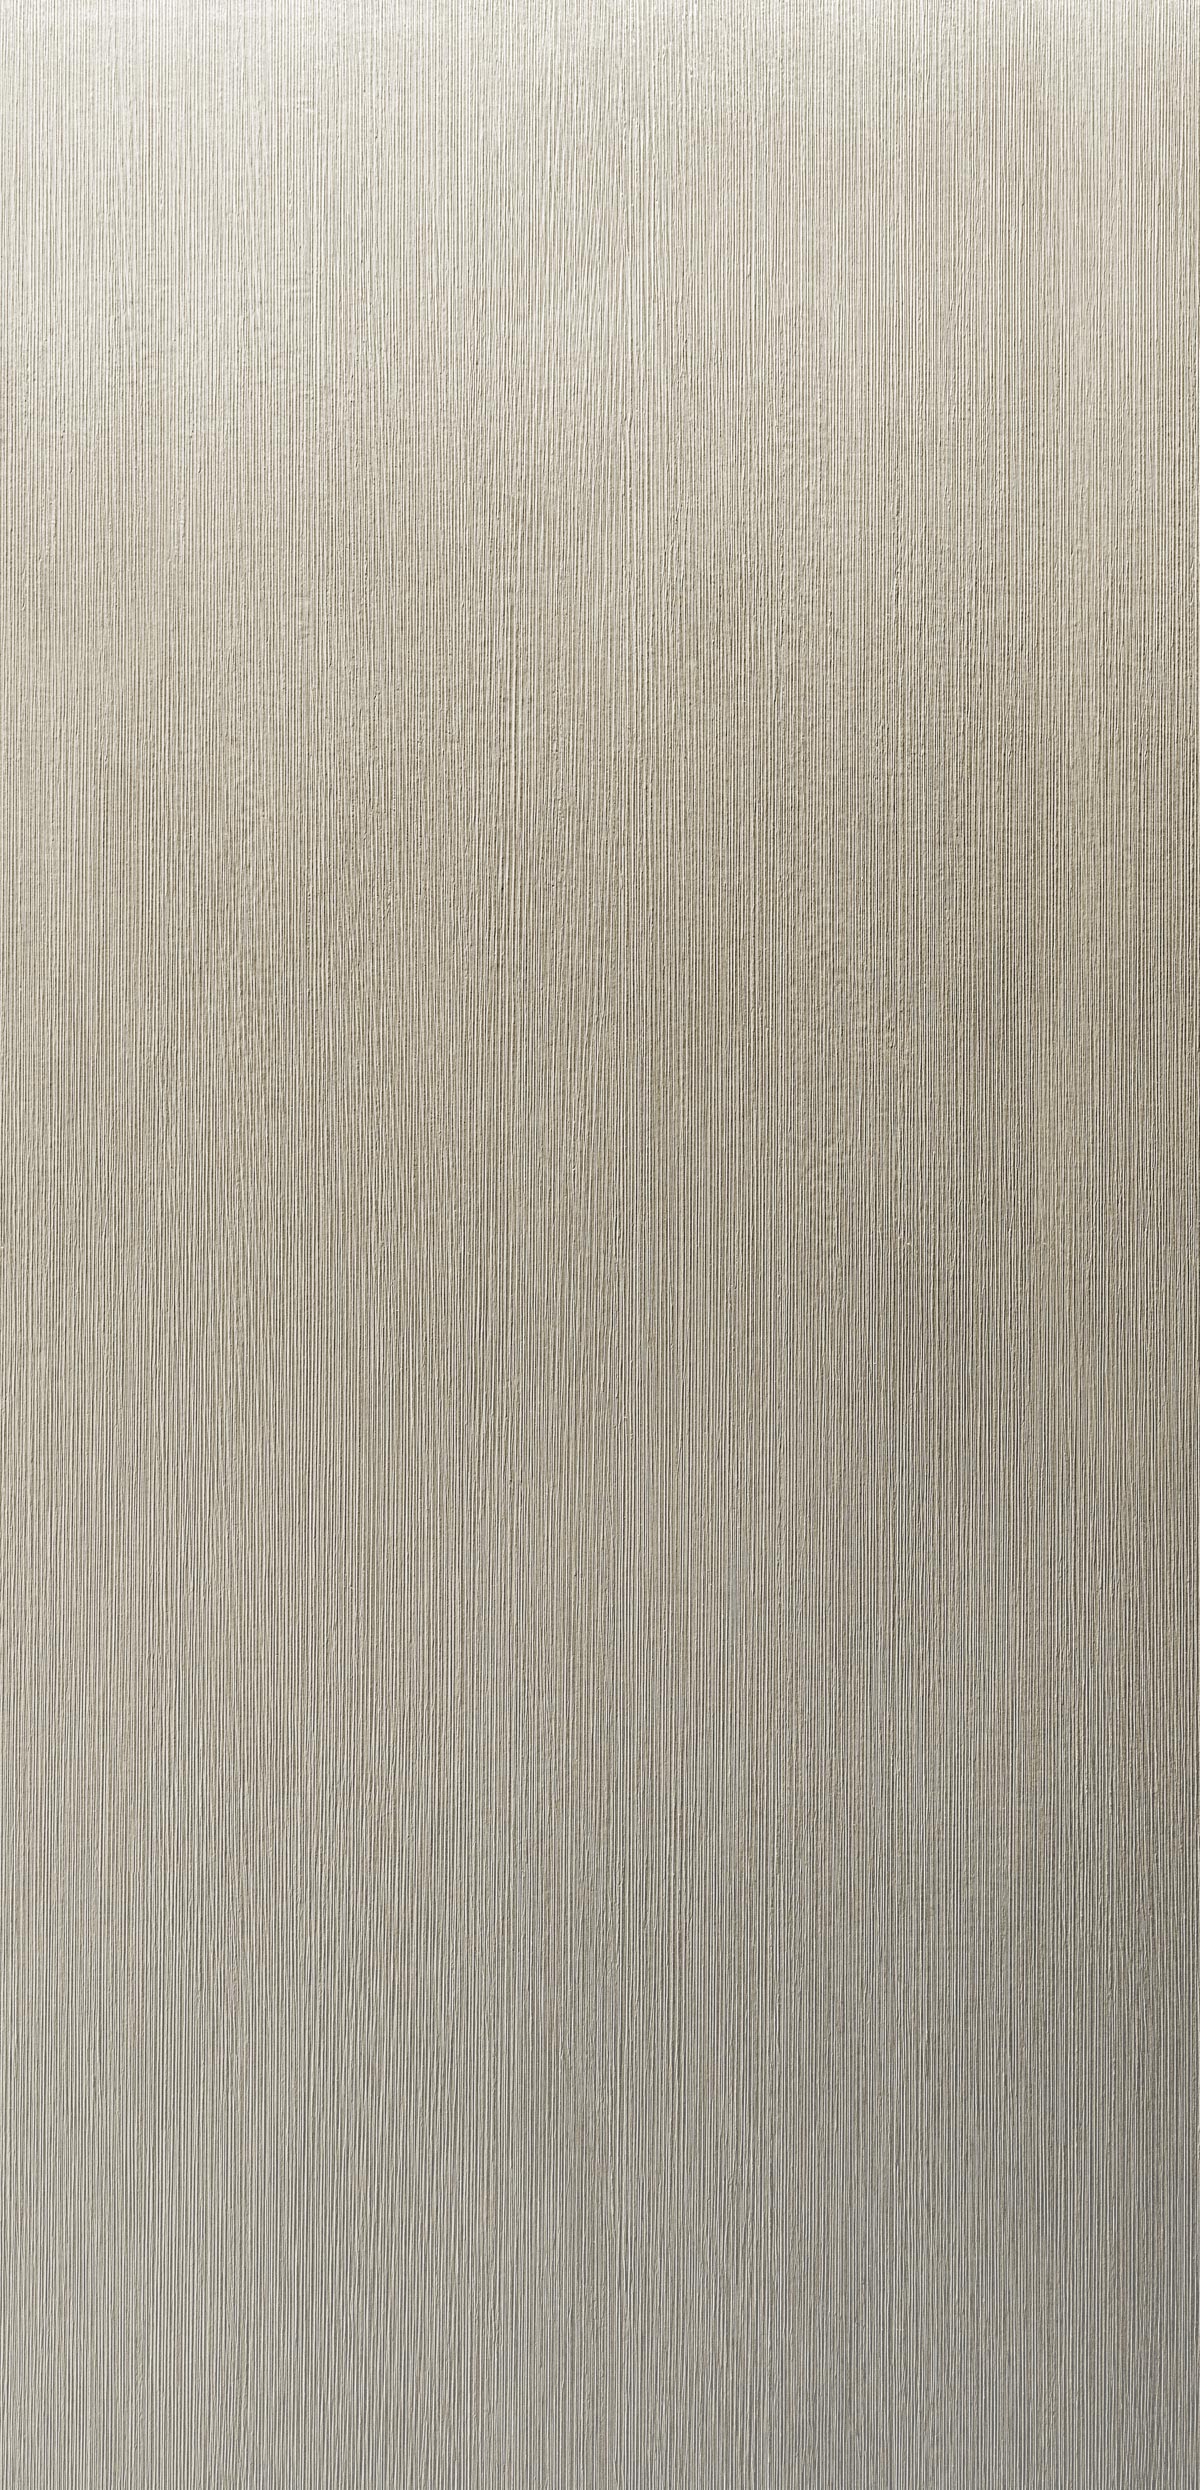 Clawed Champagne brushed 4051-panel